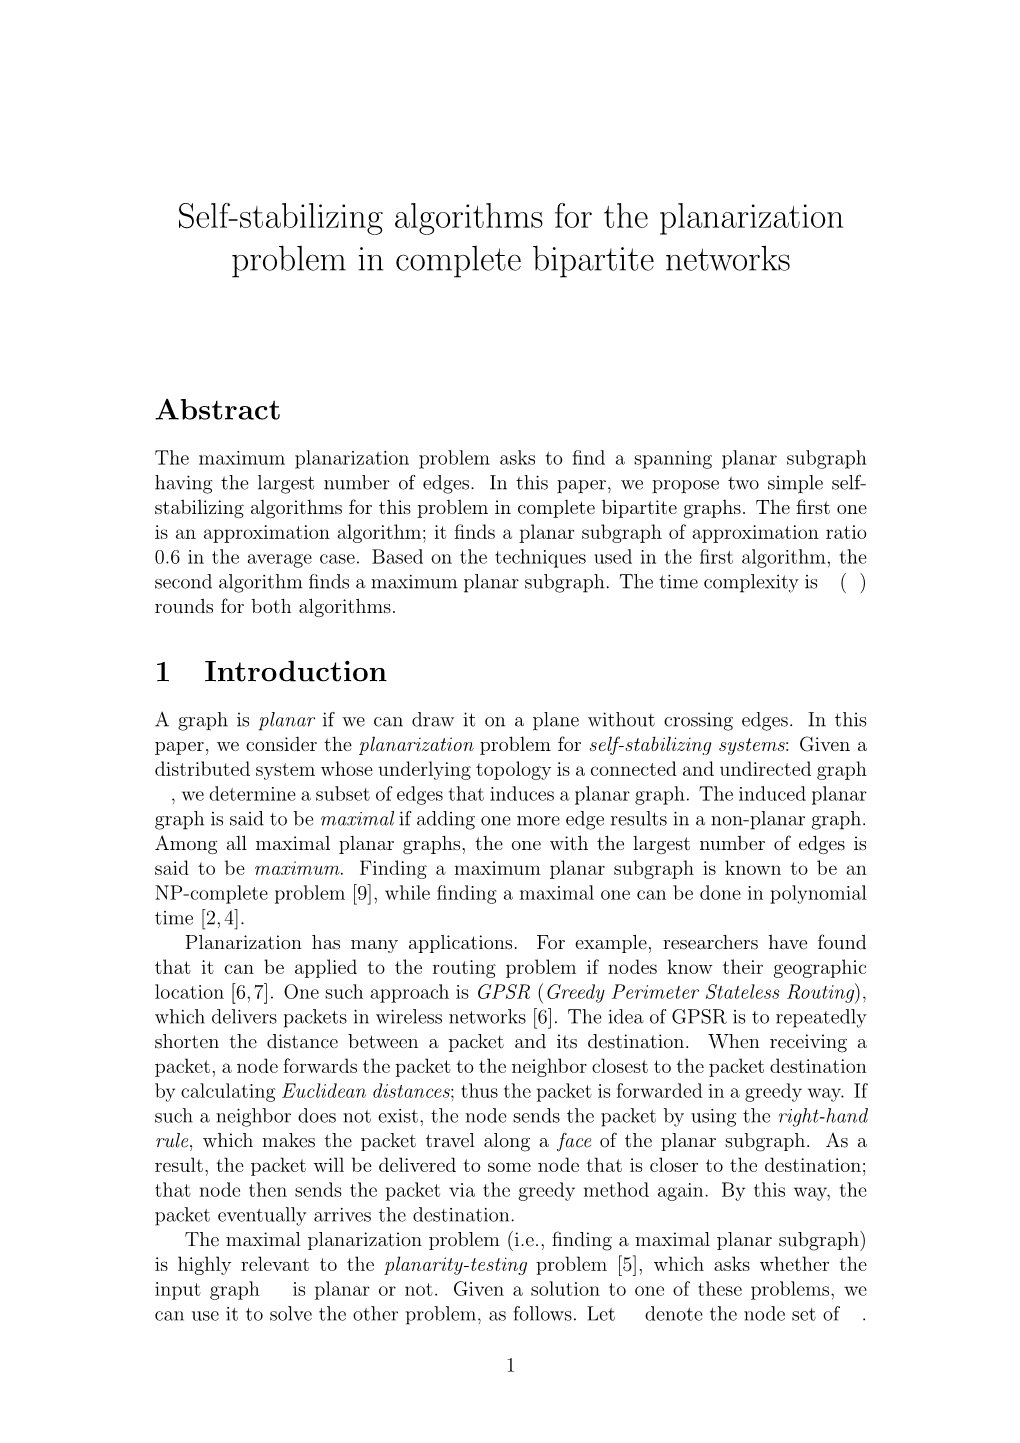 Self-Stabilizing Algorithms for the Planarization Problem in Complete Bipartite Networks